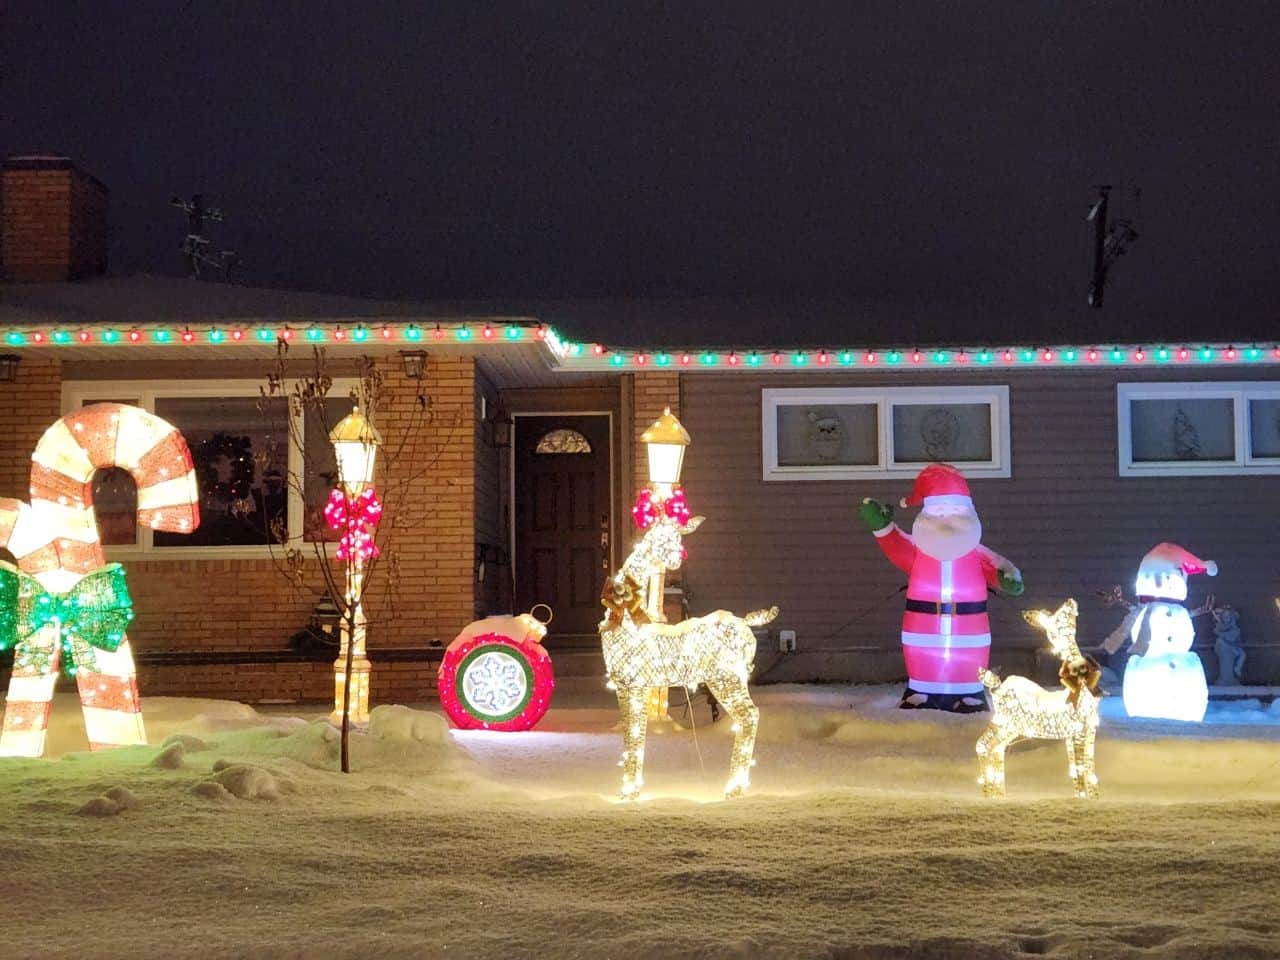 Brooks Alberta gives a very merry Christmas vibe if you take a drive around town in what they call the Twinkle Tour.